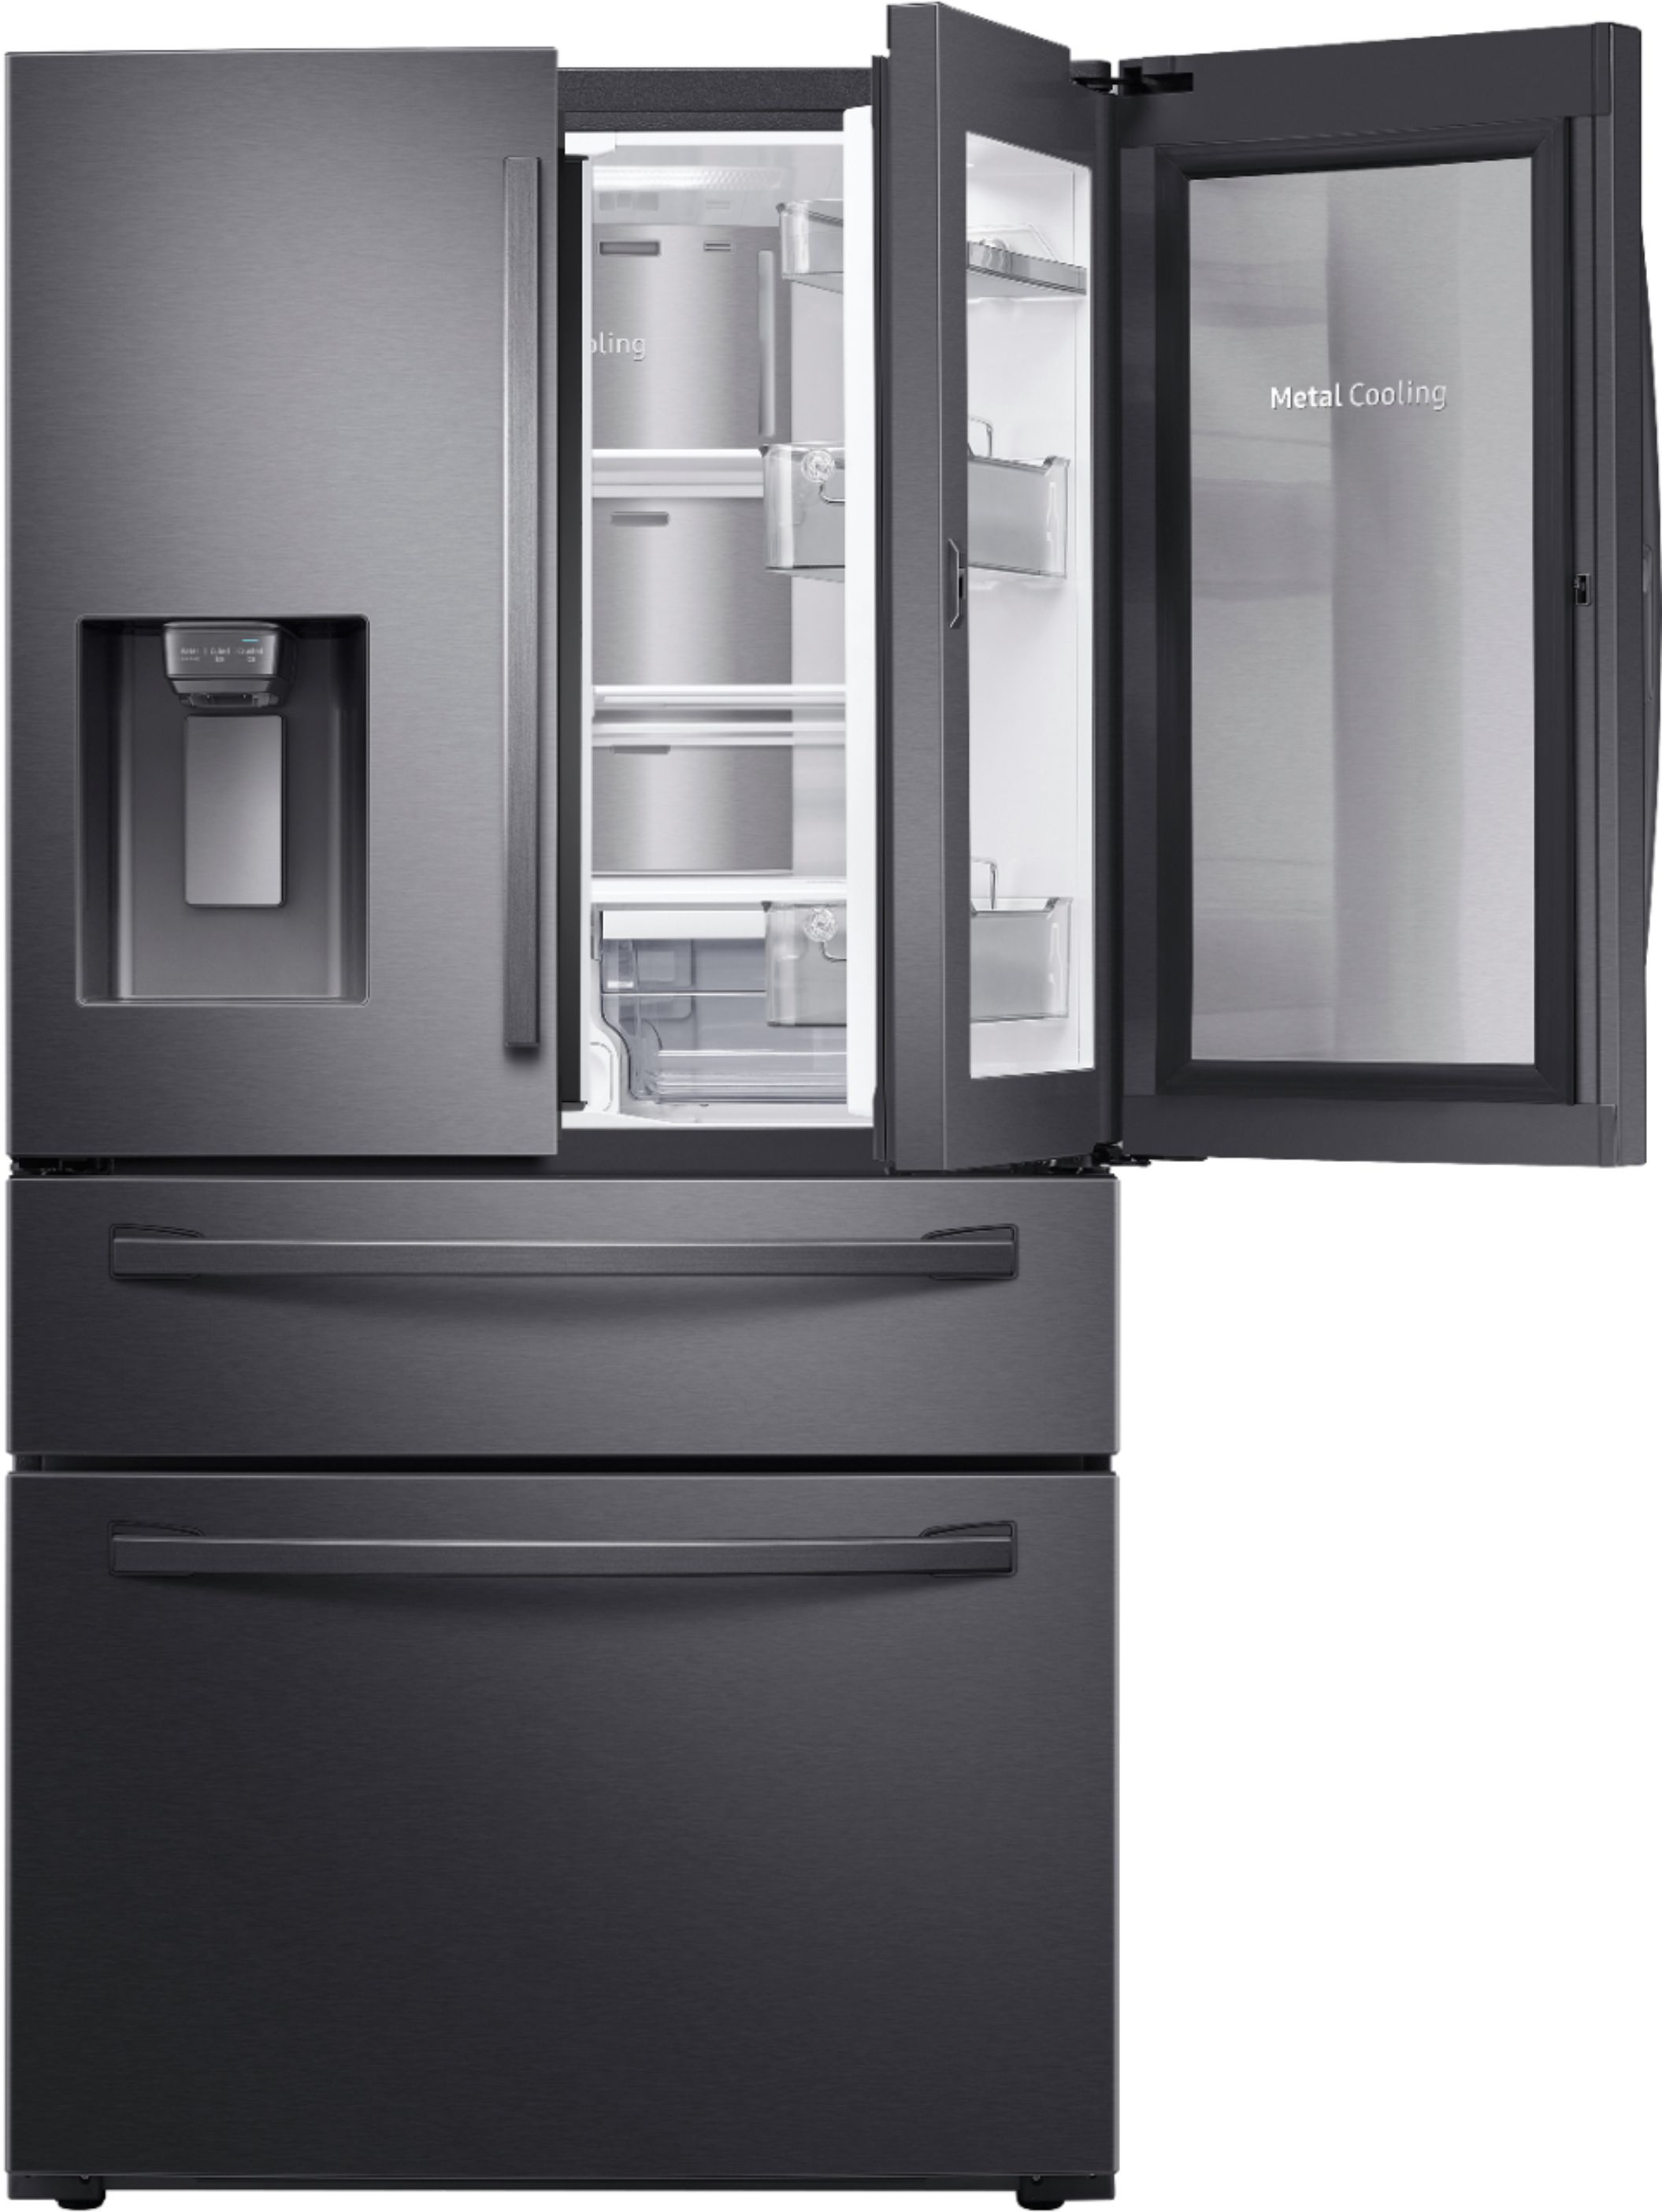 Why Is My Samsung Fridge Making Noise – Press To Cook